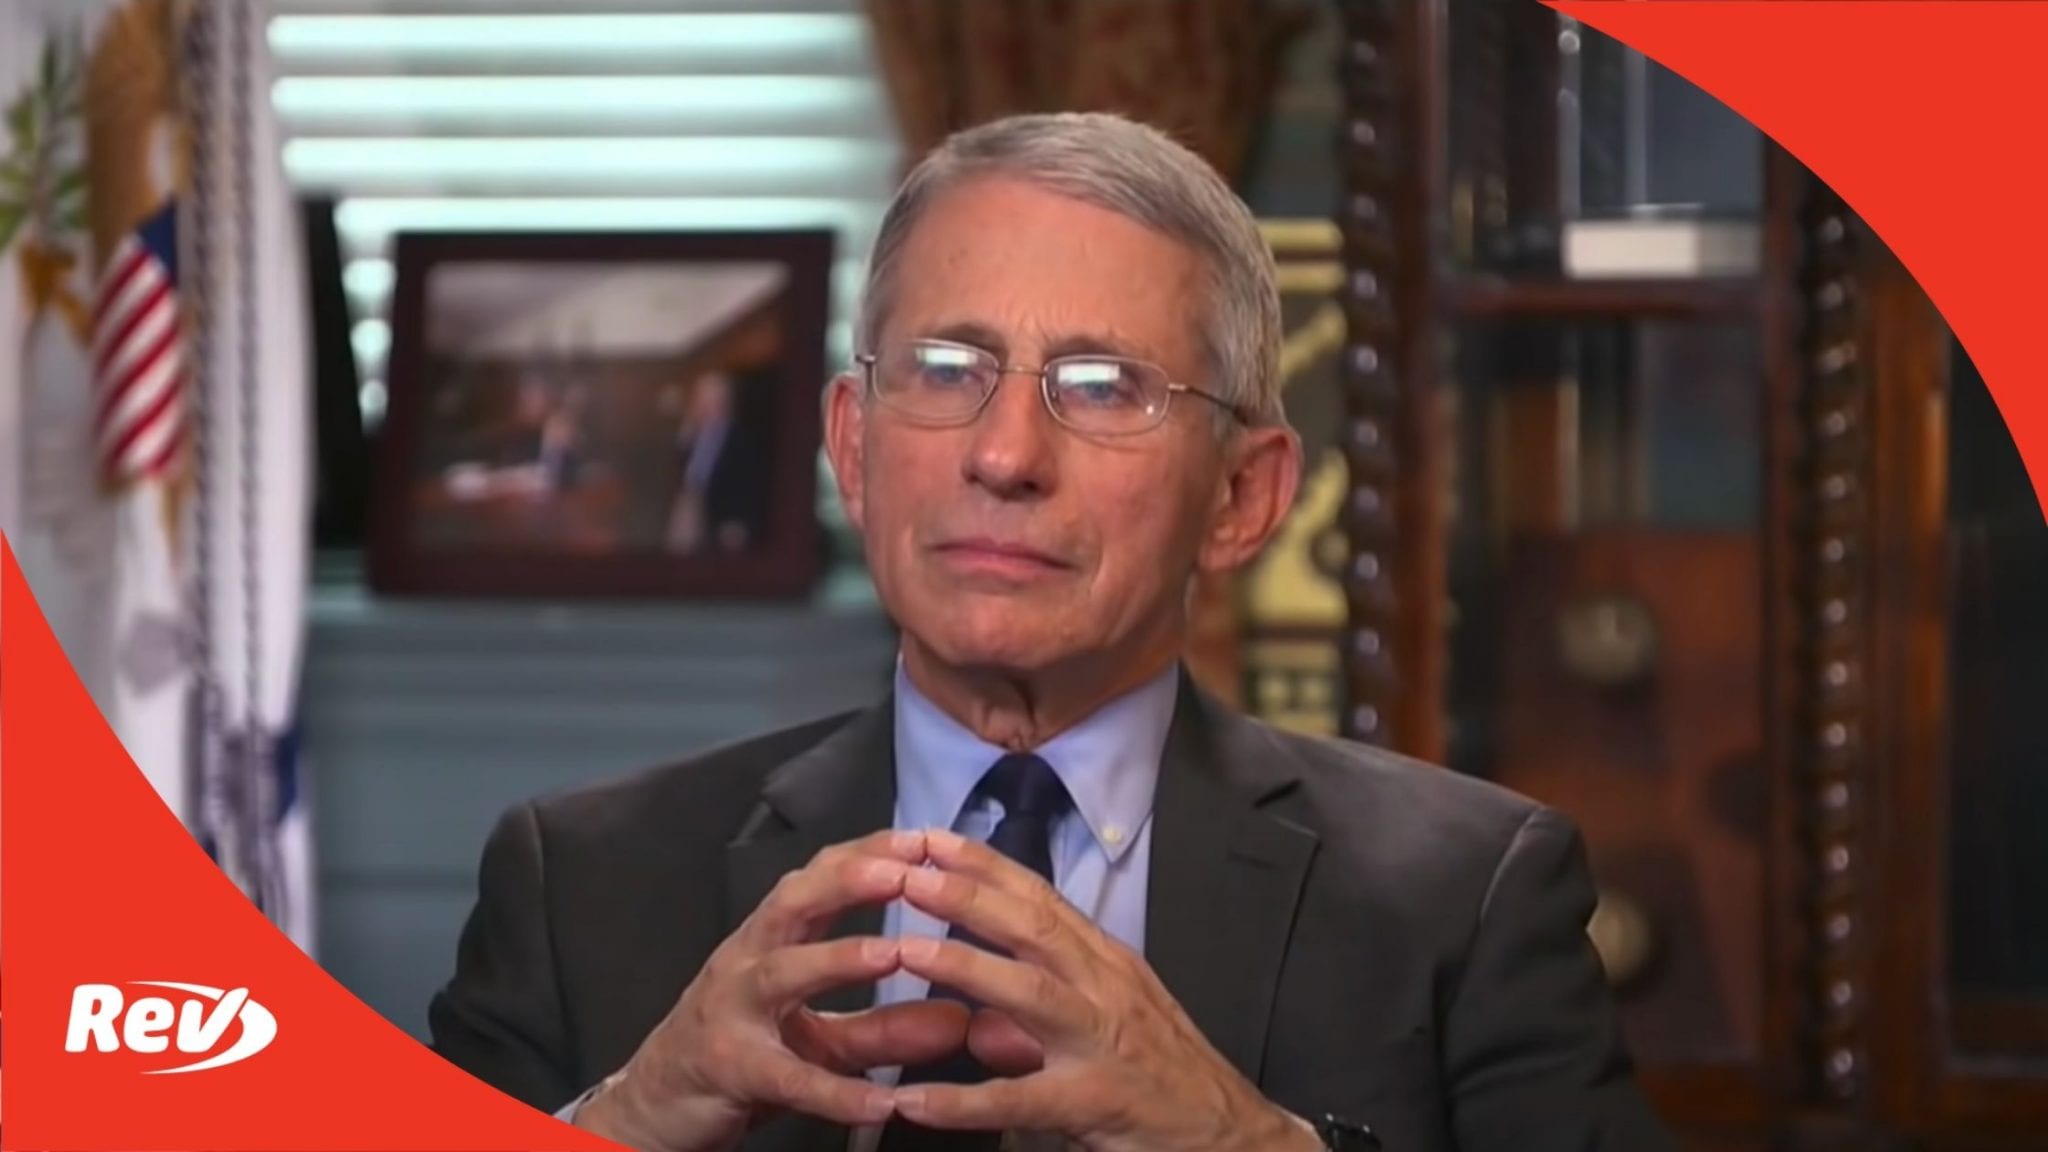 Dr Fauci Interview Taken Out of Context in Trump Ad